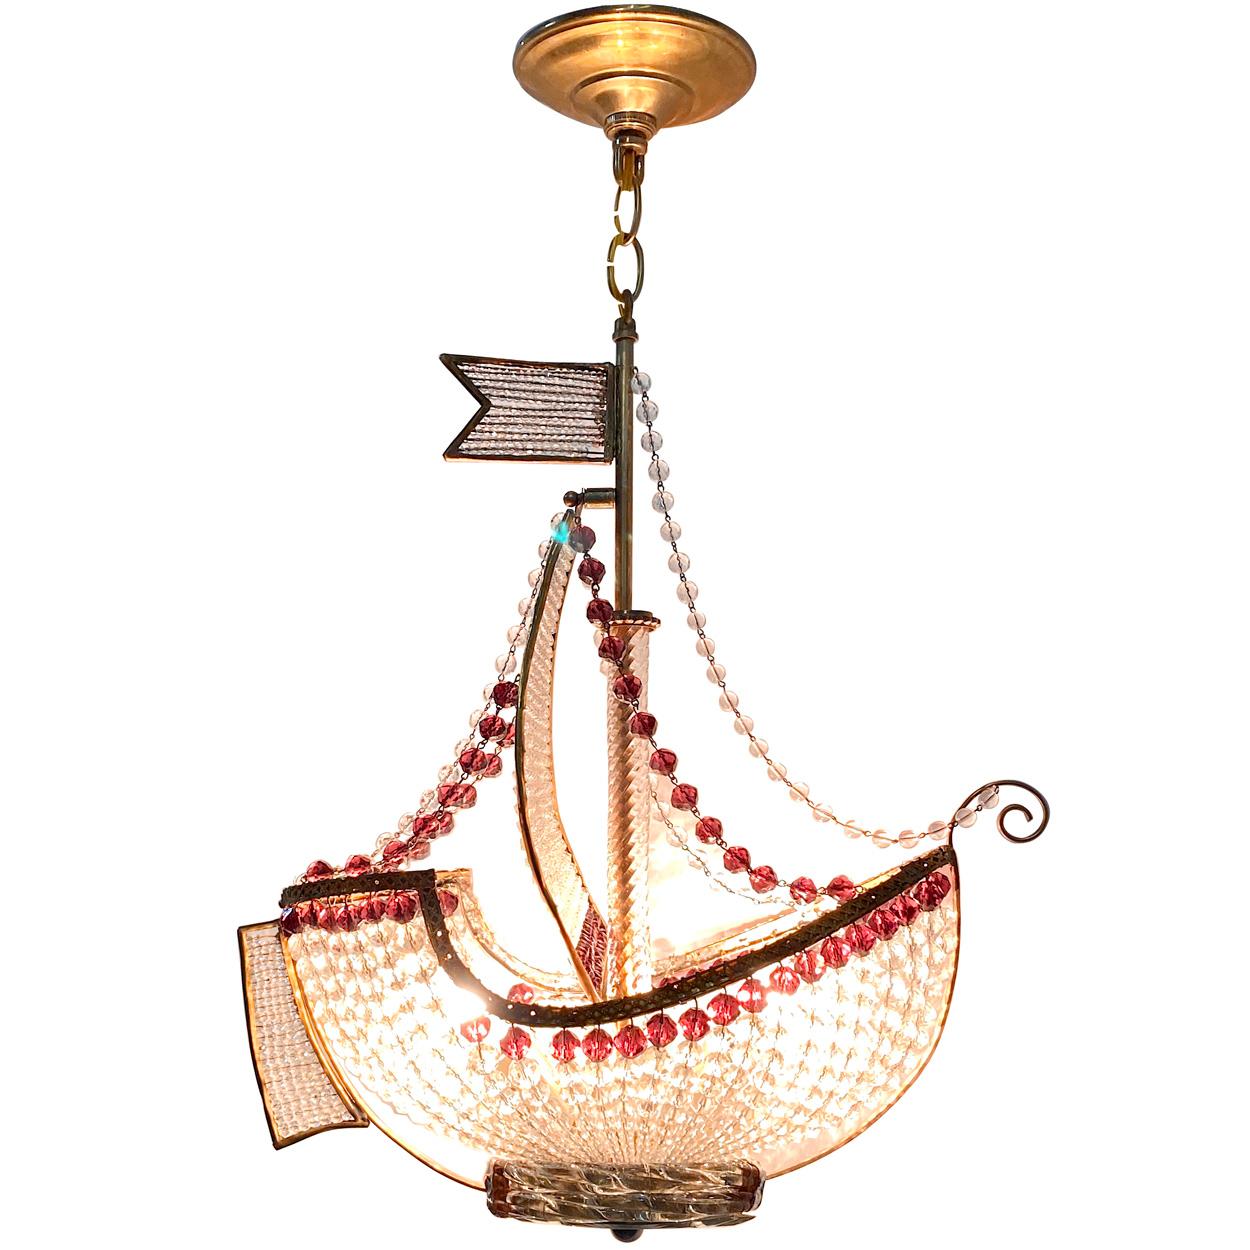 A circa 1930s French ship shaped chandelier with amethyst beads and beaded crystal body.

Measurements:
Height of body 21? (min. drop)
Depth 7.5?
Width/length 17?